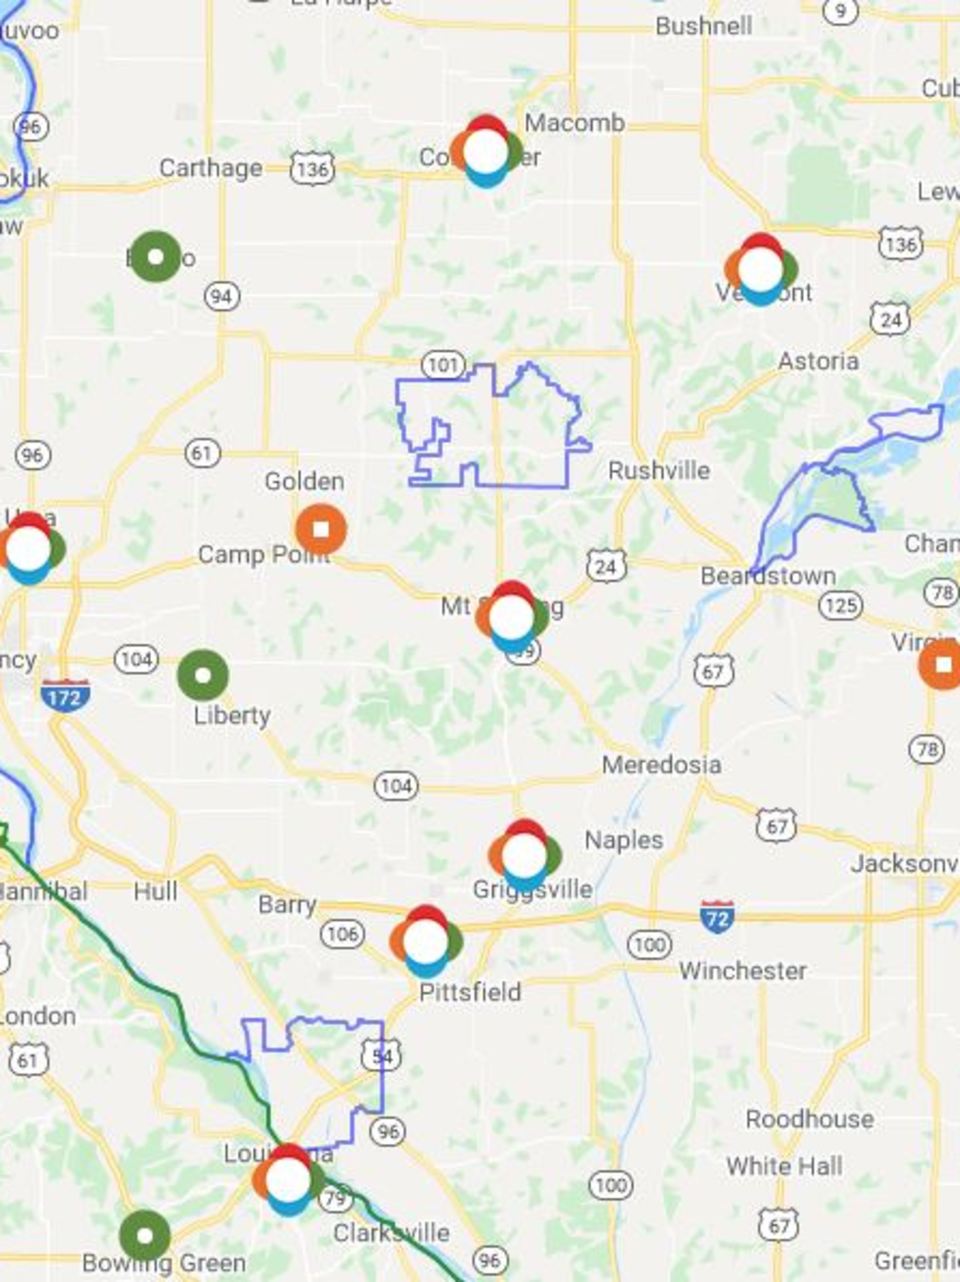 ameren-power-outage-map-illinois-detailed-map